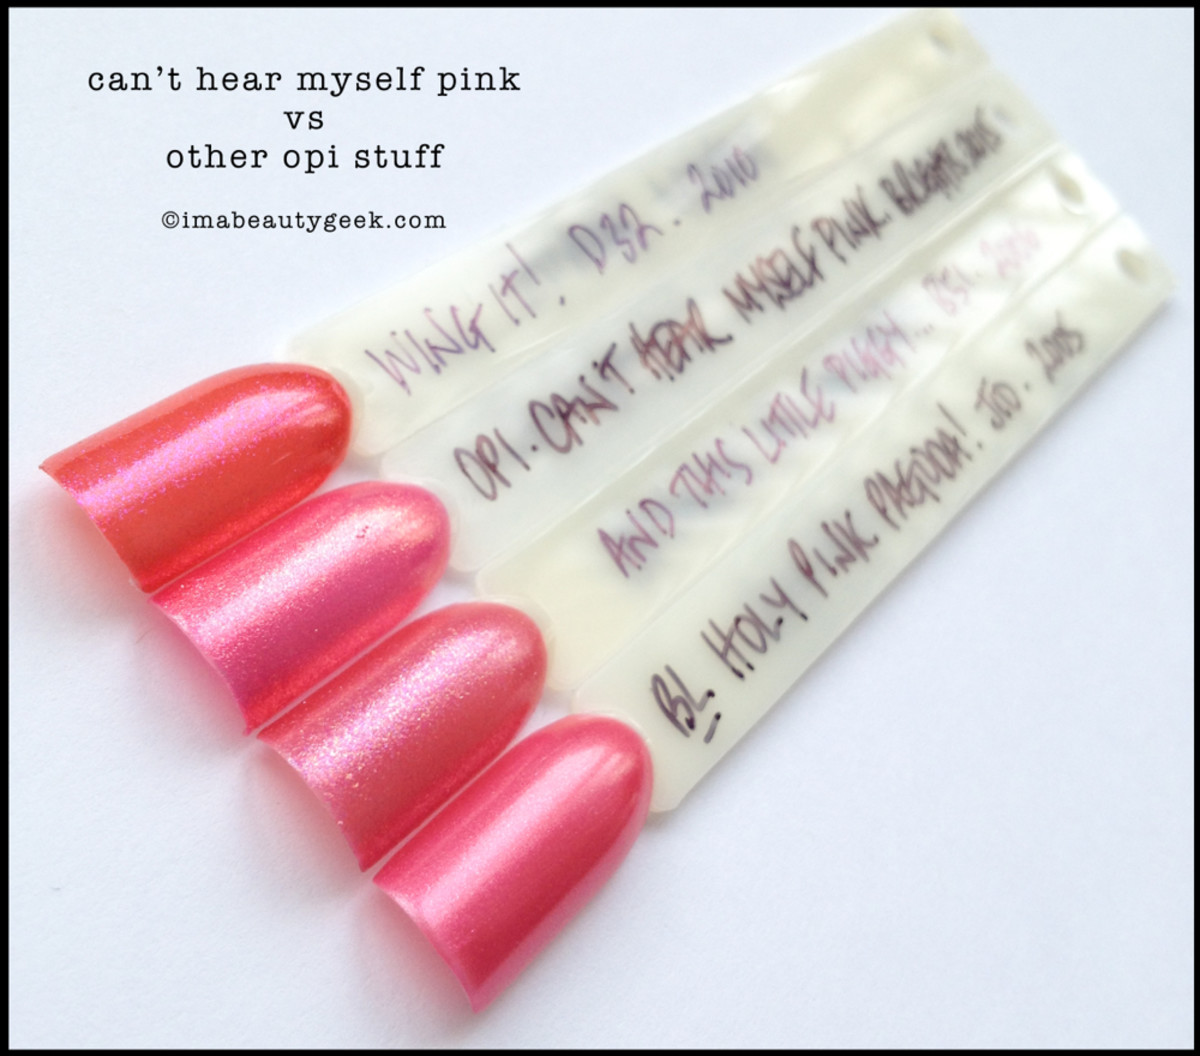 OPI Brights 2015 Comparison Swatches_OPI Can't Hear Myself Pink Comarisons